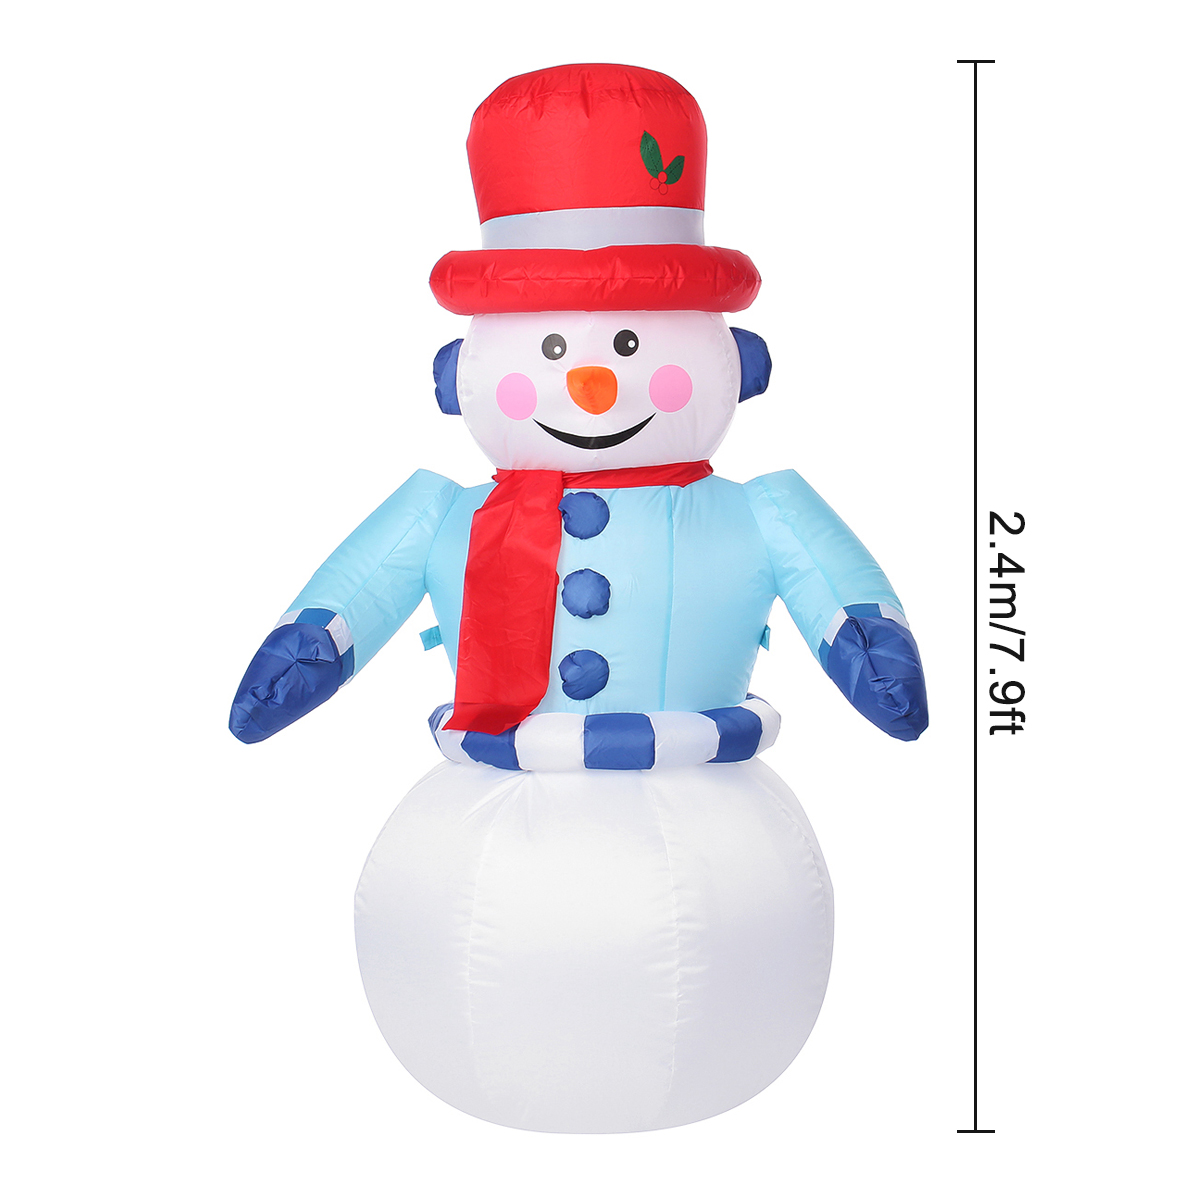 8FT-LED-Christmas-Inflatable-Snowman-Halloween-Outdoors-Ornaments-Shop-Decoration-1785588-6